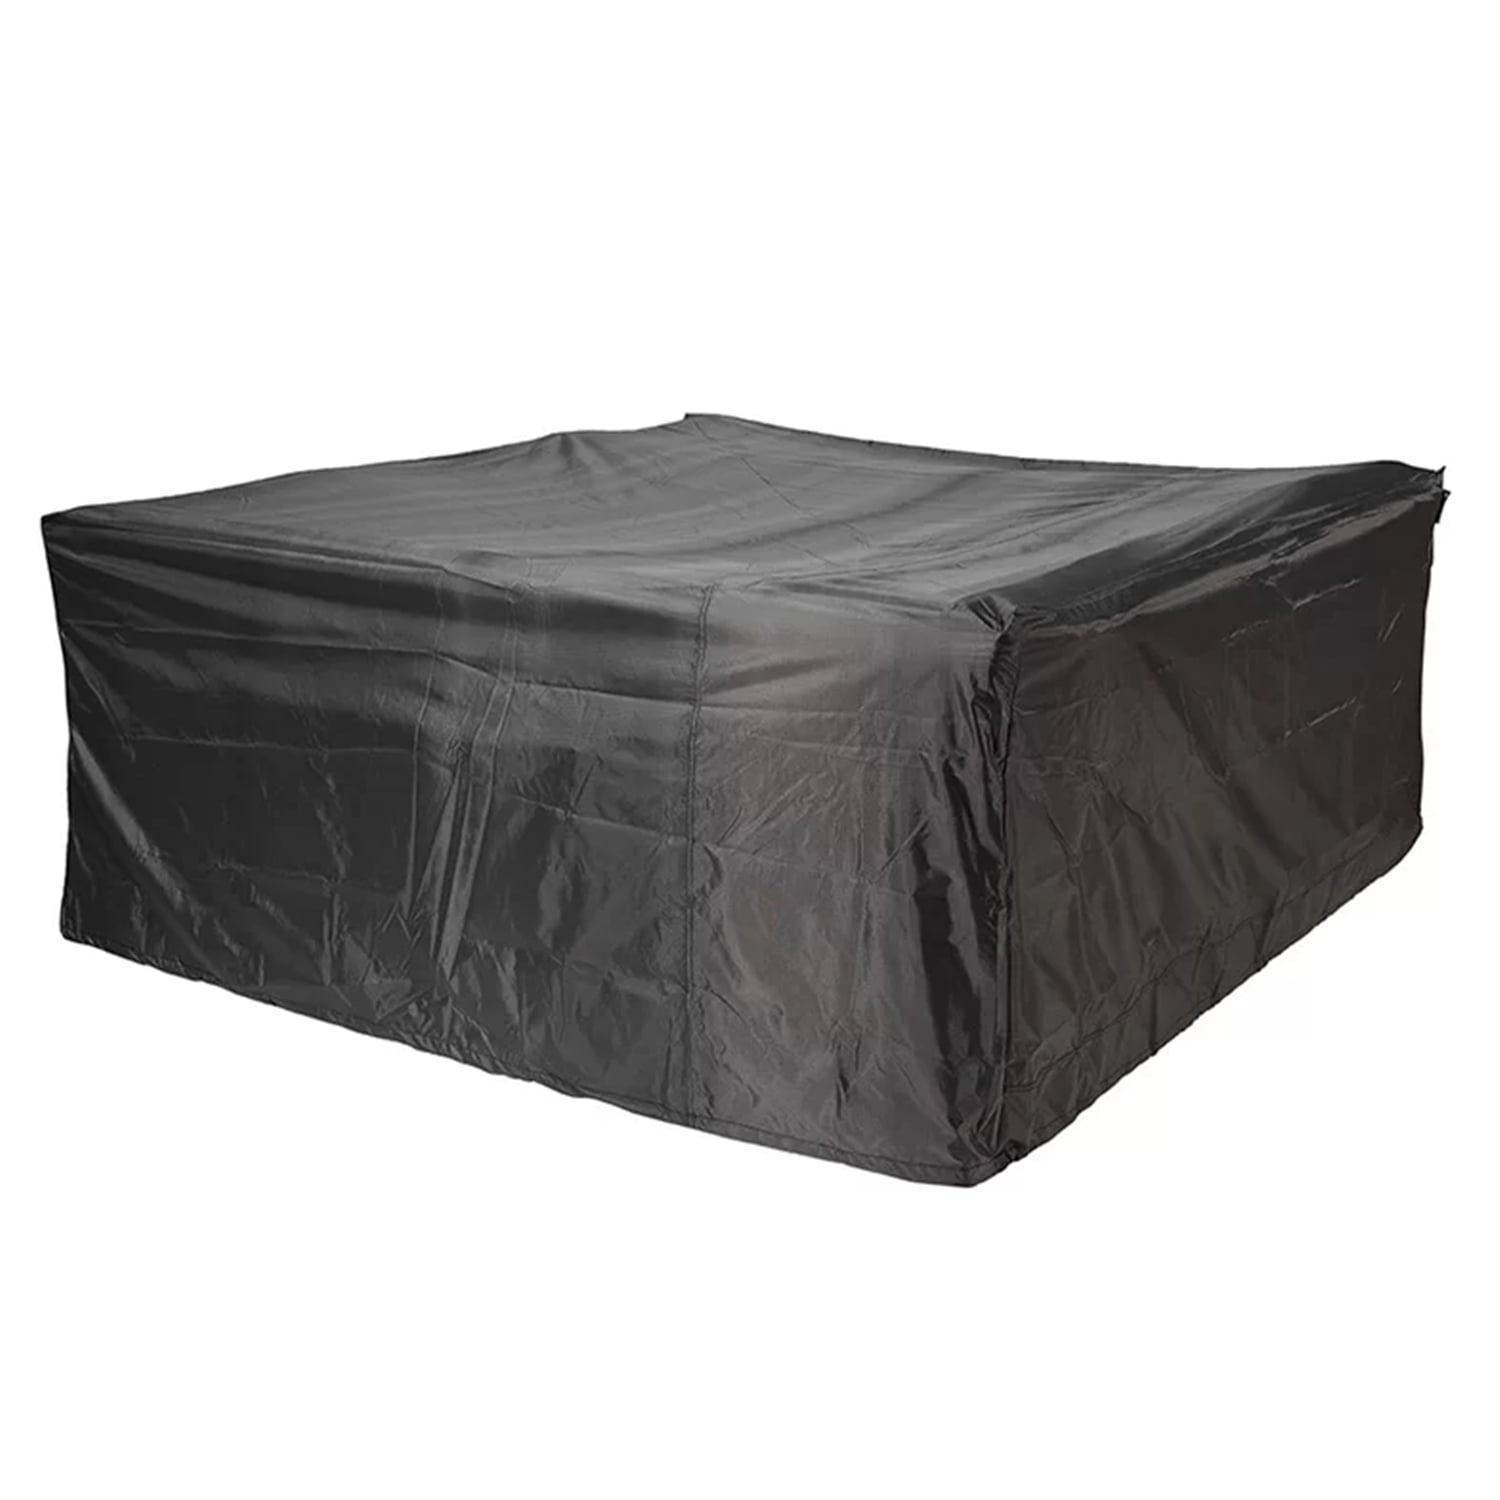 Furniture cover sets furniture protective covers Square Table Cover Tarpaulin Outdoor Decoration Breathable Anti-aging Patio Oxford Cloth 2 Colors Support Customization 